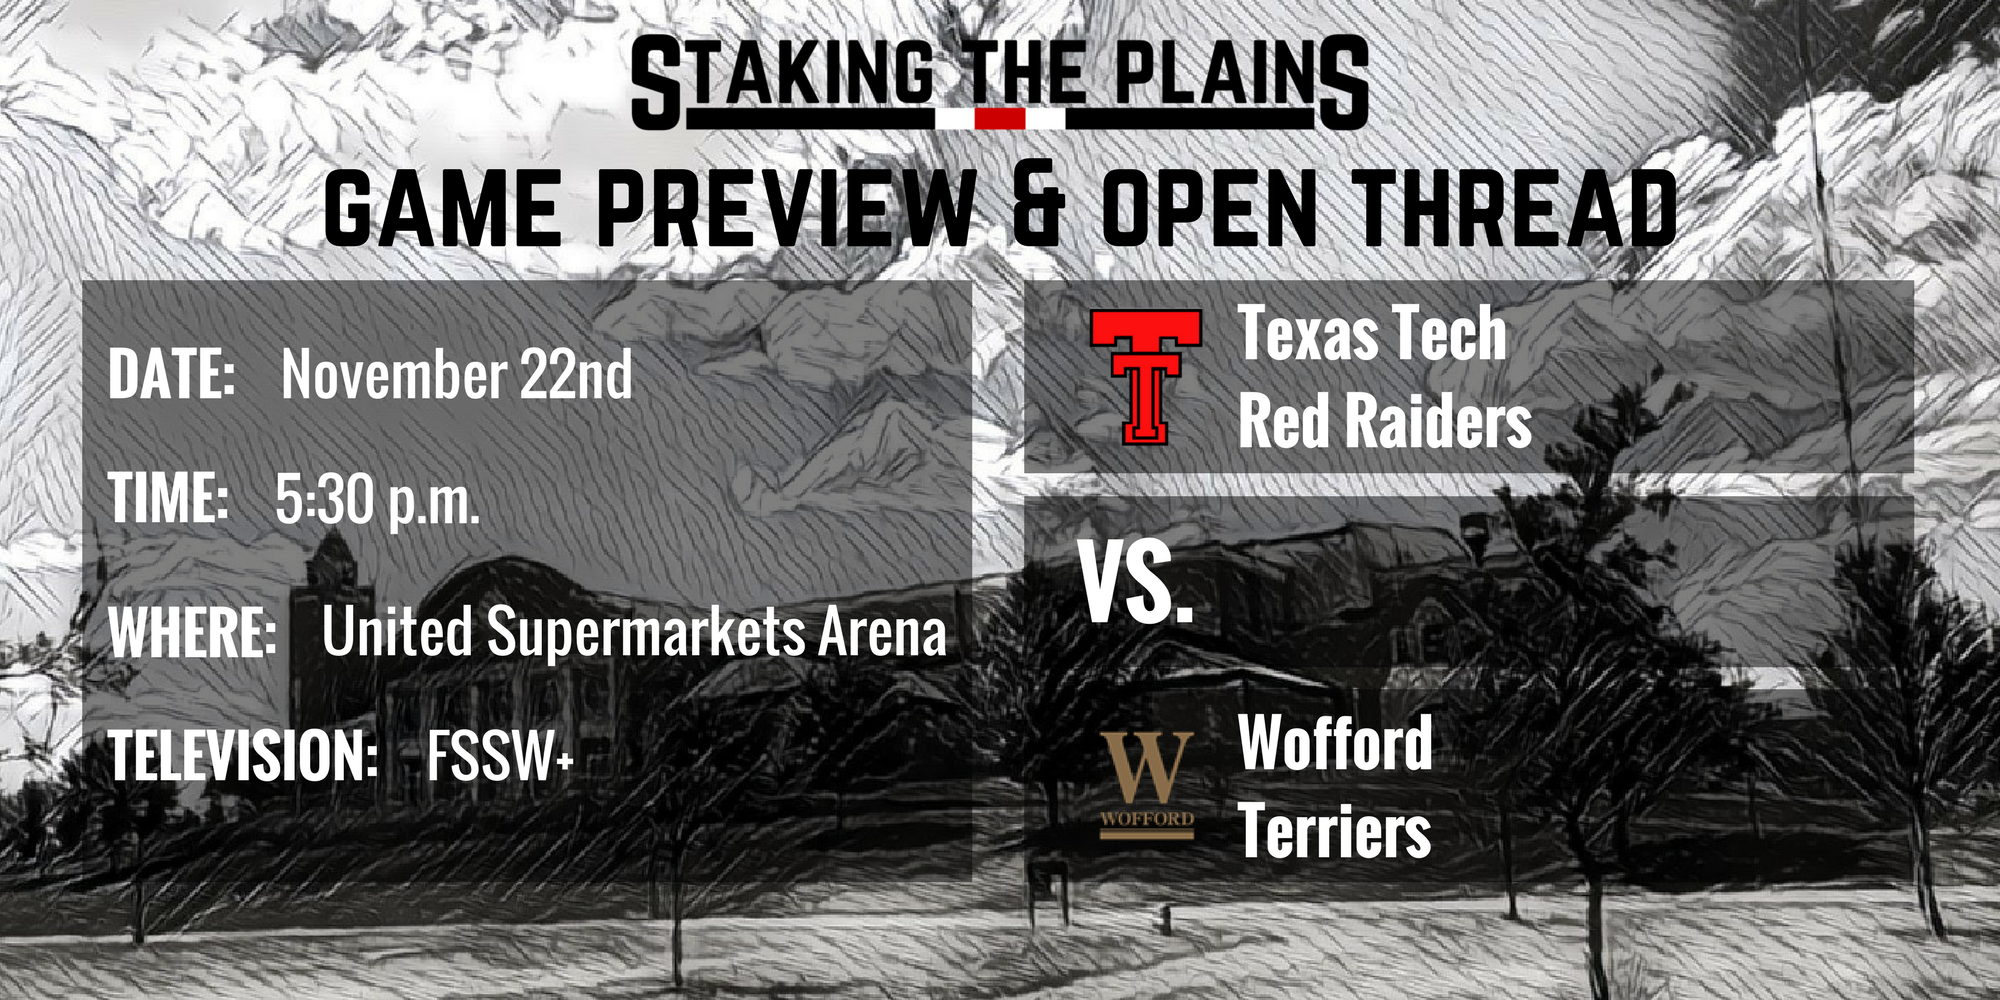 Game Preview and Open Thread: Wofford vs. Texas Tech